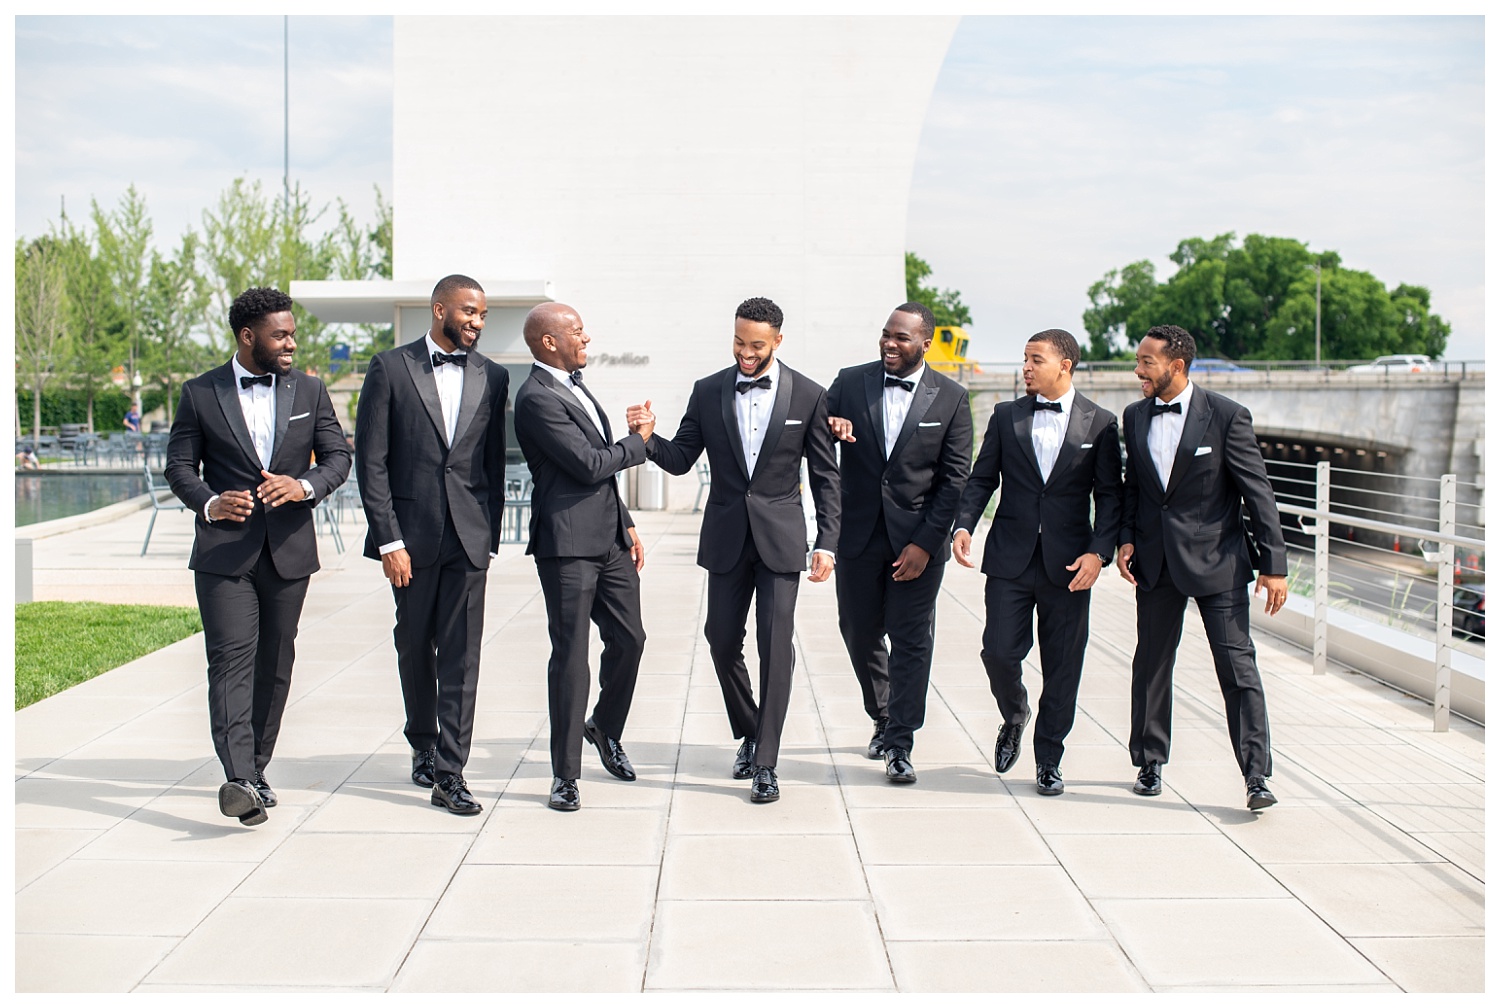 groom and groomsmen walking together at the Kennedy Center in Washington, D.C.